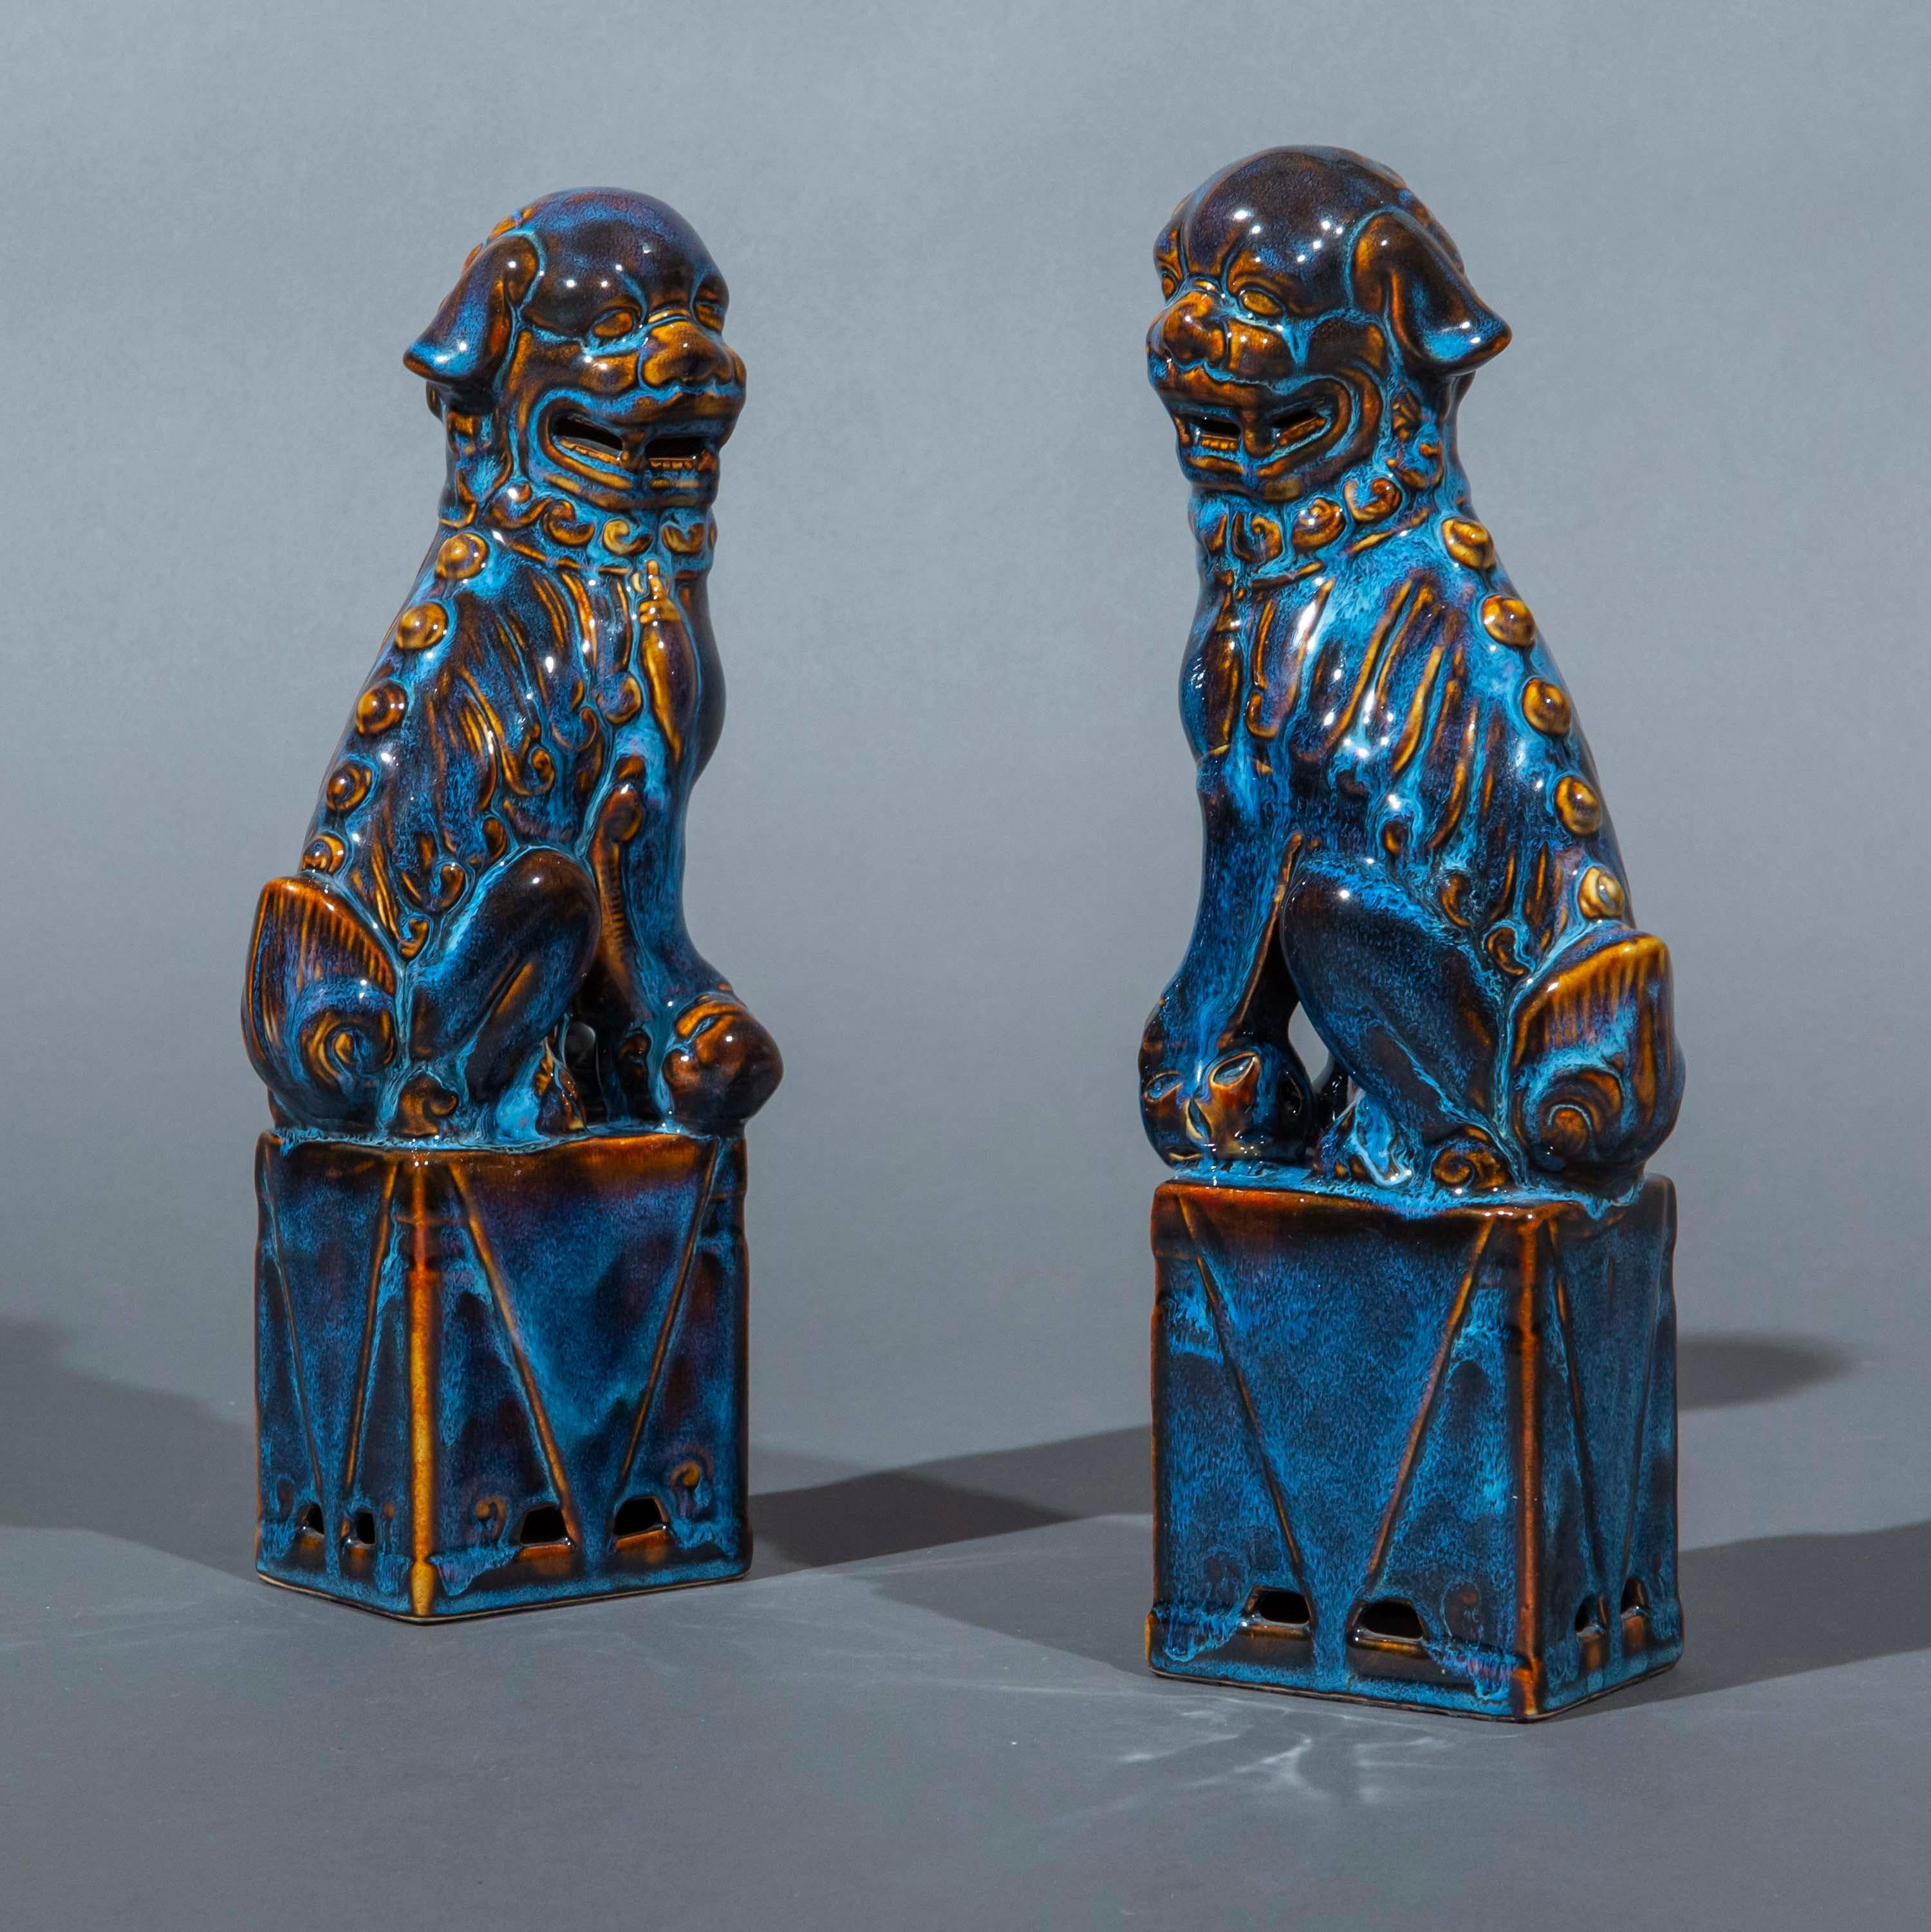 A wonderfully decorative pair of porcelain foo dogs, or guardian lions, beautifully glazed with purple and blue streaks
China, 20th century

Why we like them
We love the opulence of colours and the intricate pattern of the glaze. Very decorative